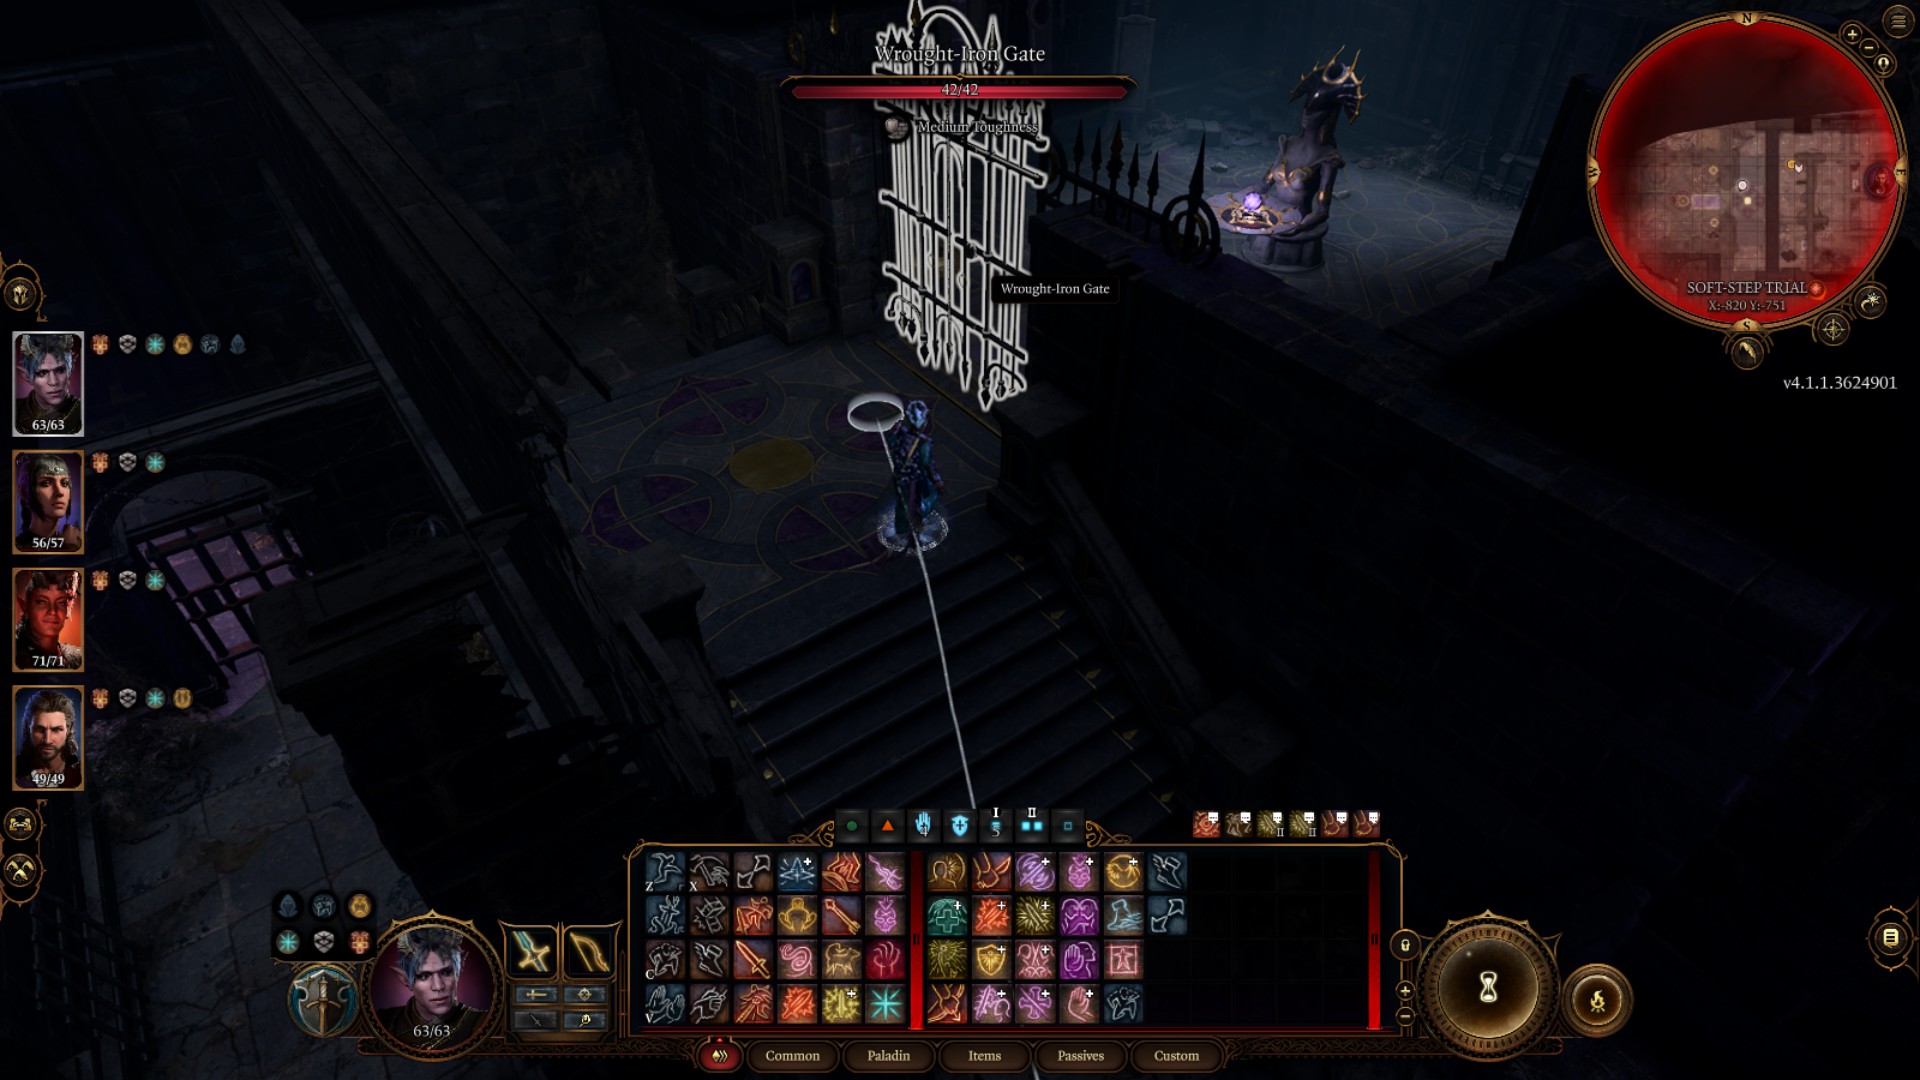 An image showing the end of the Soft-Step trial in Baldur's Gate 3.